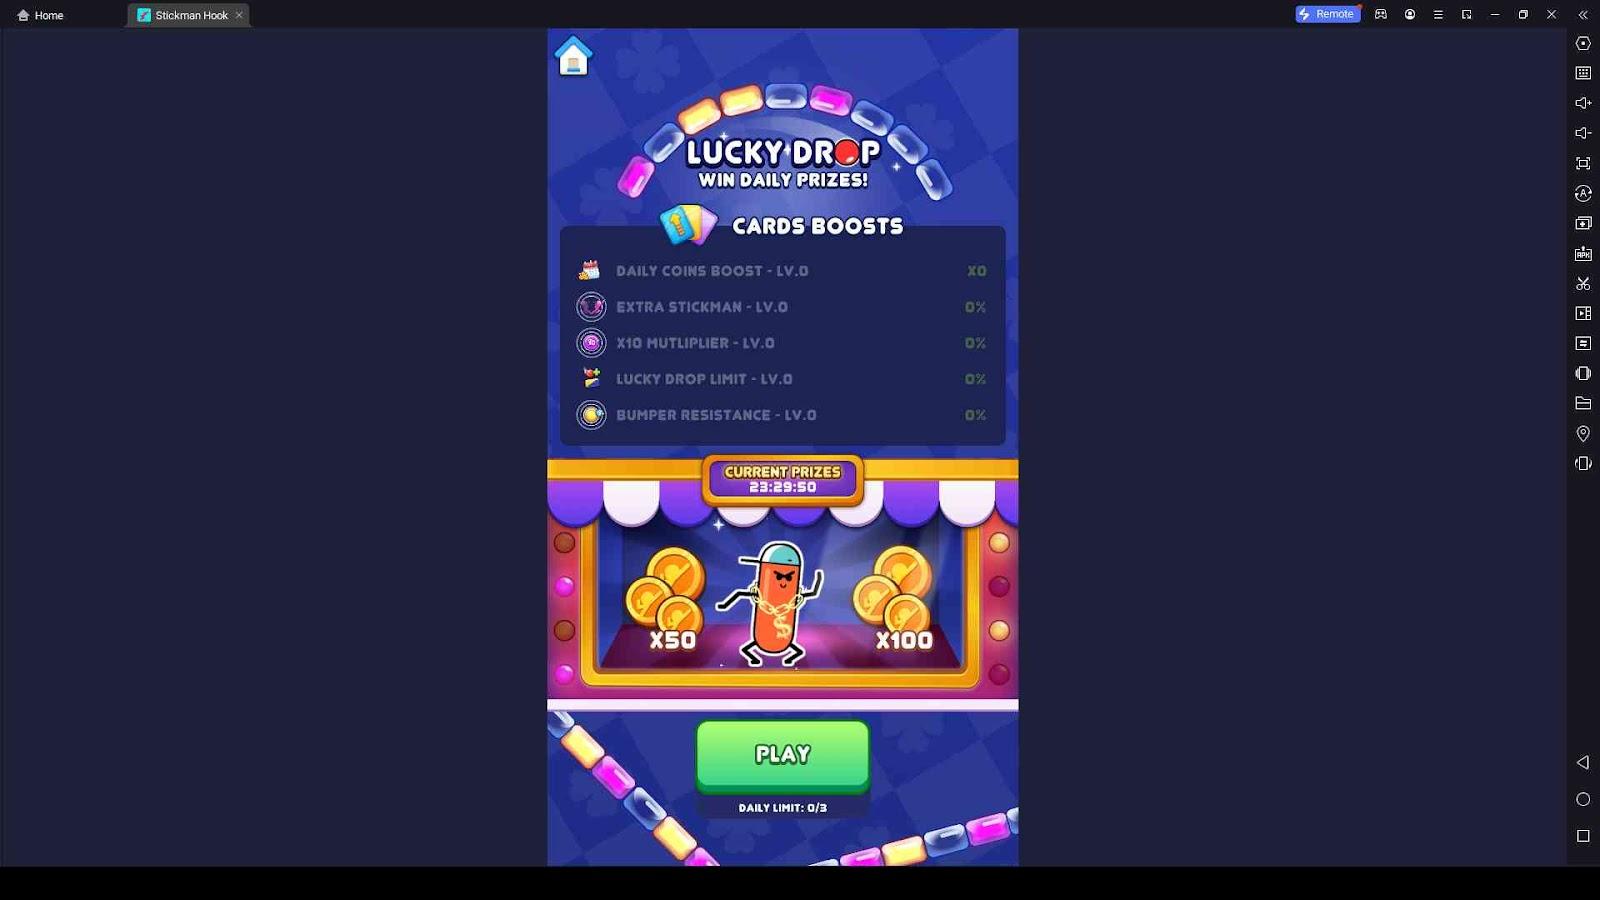 Play Lucky Drop and Win Daily Prizes